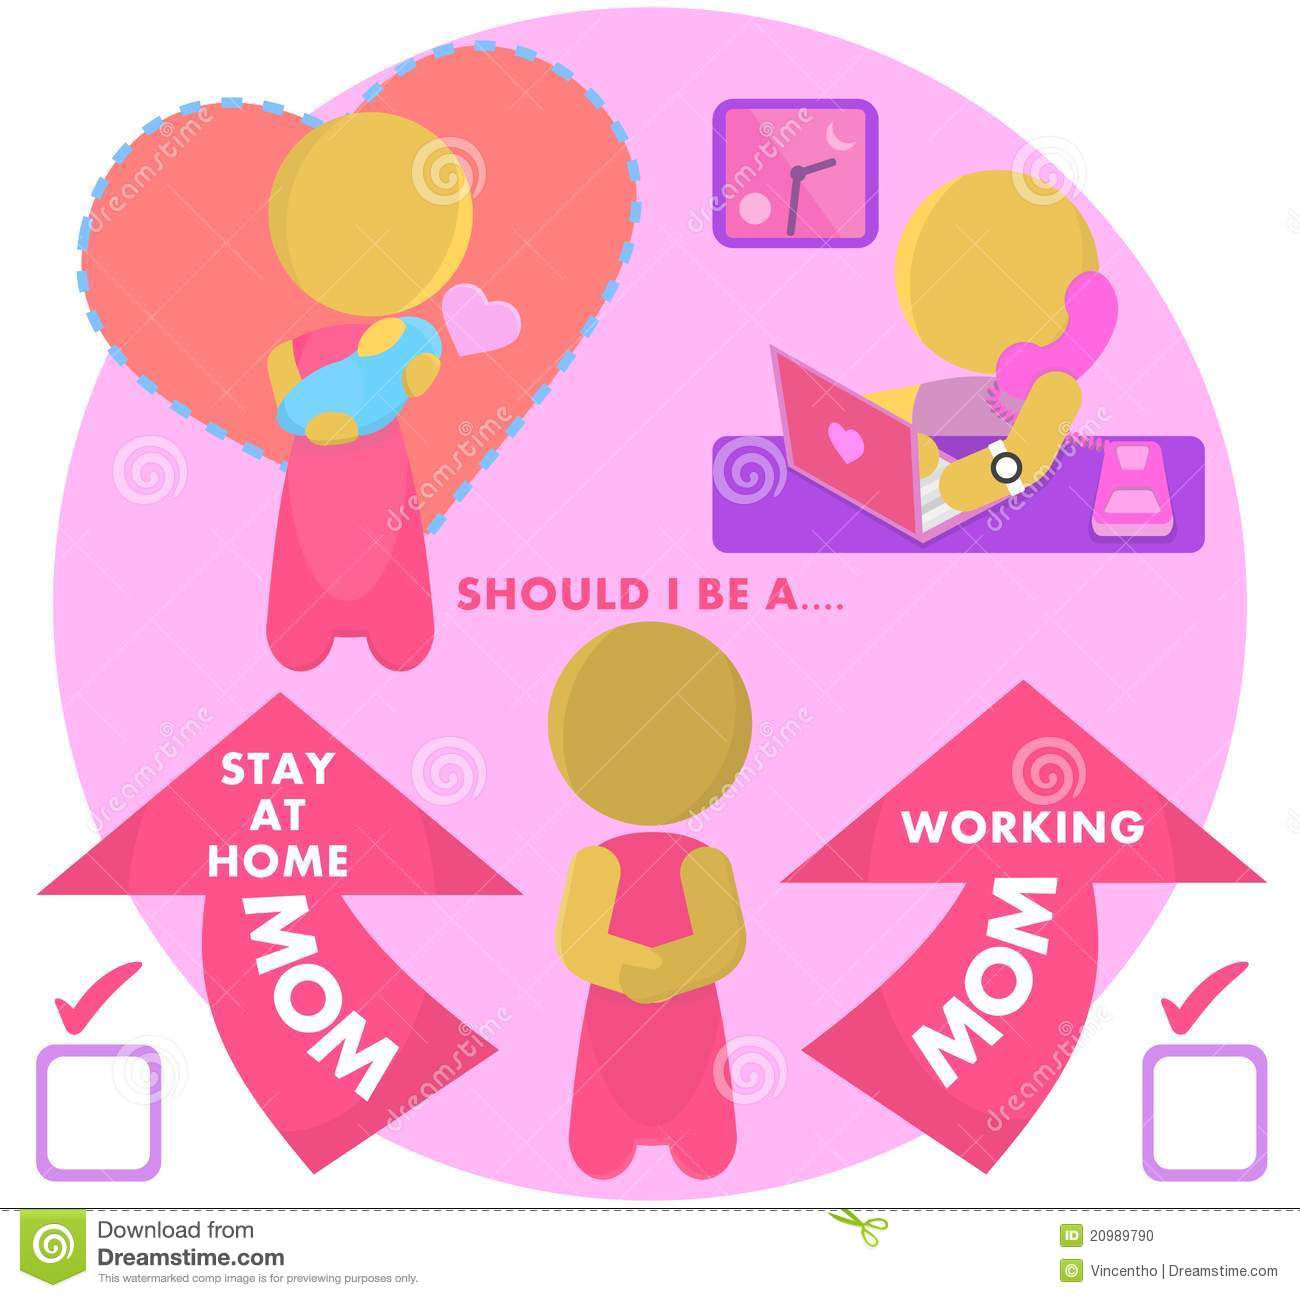 Sahm Stay At Home Mom Or Working Mum Illustration Stock Photo   Image